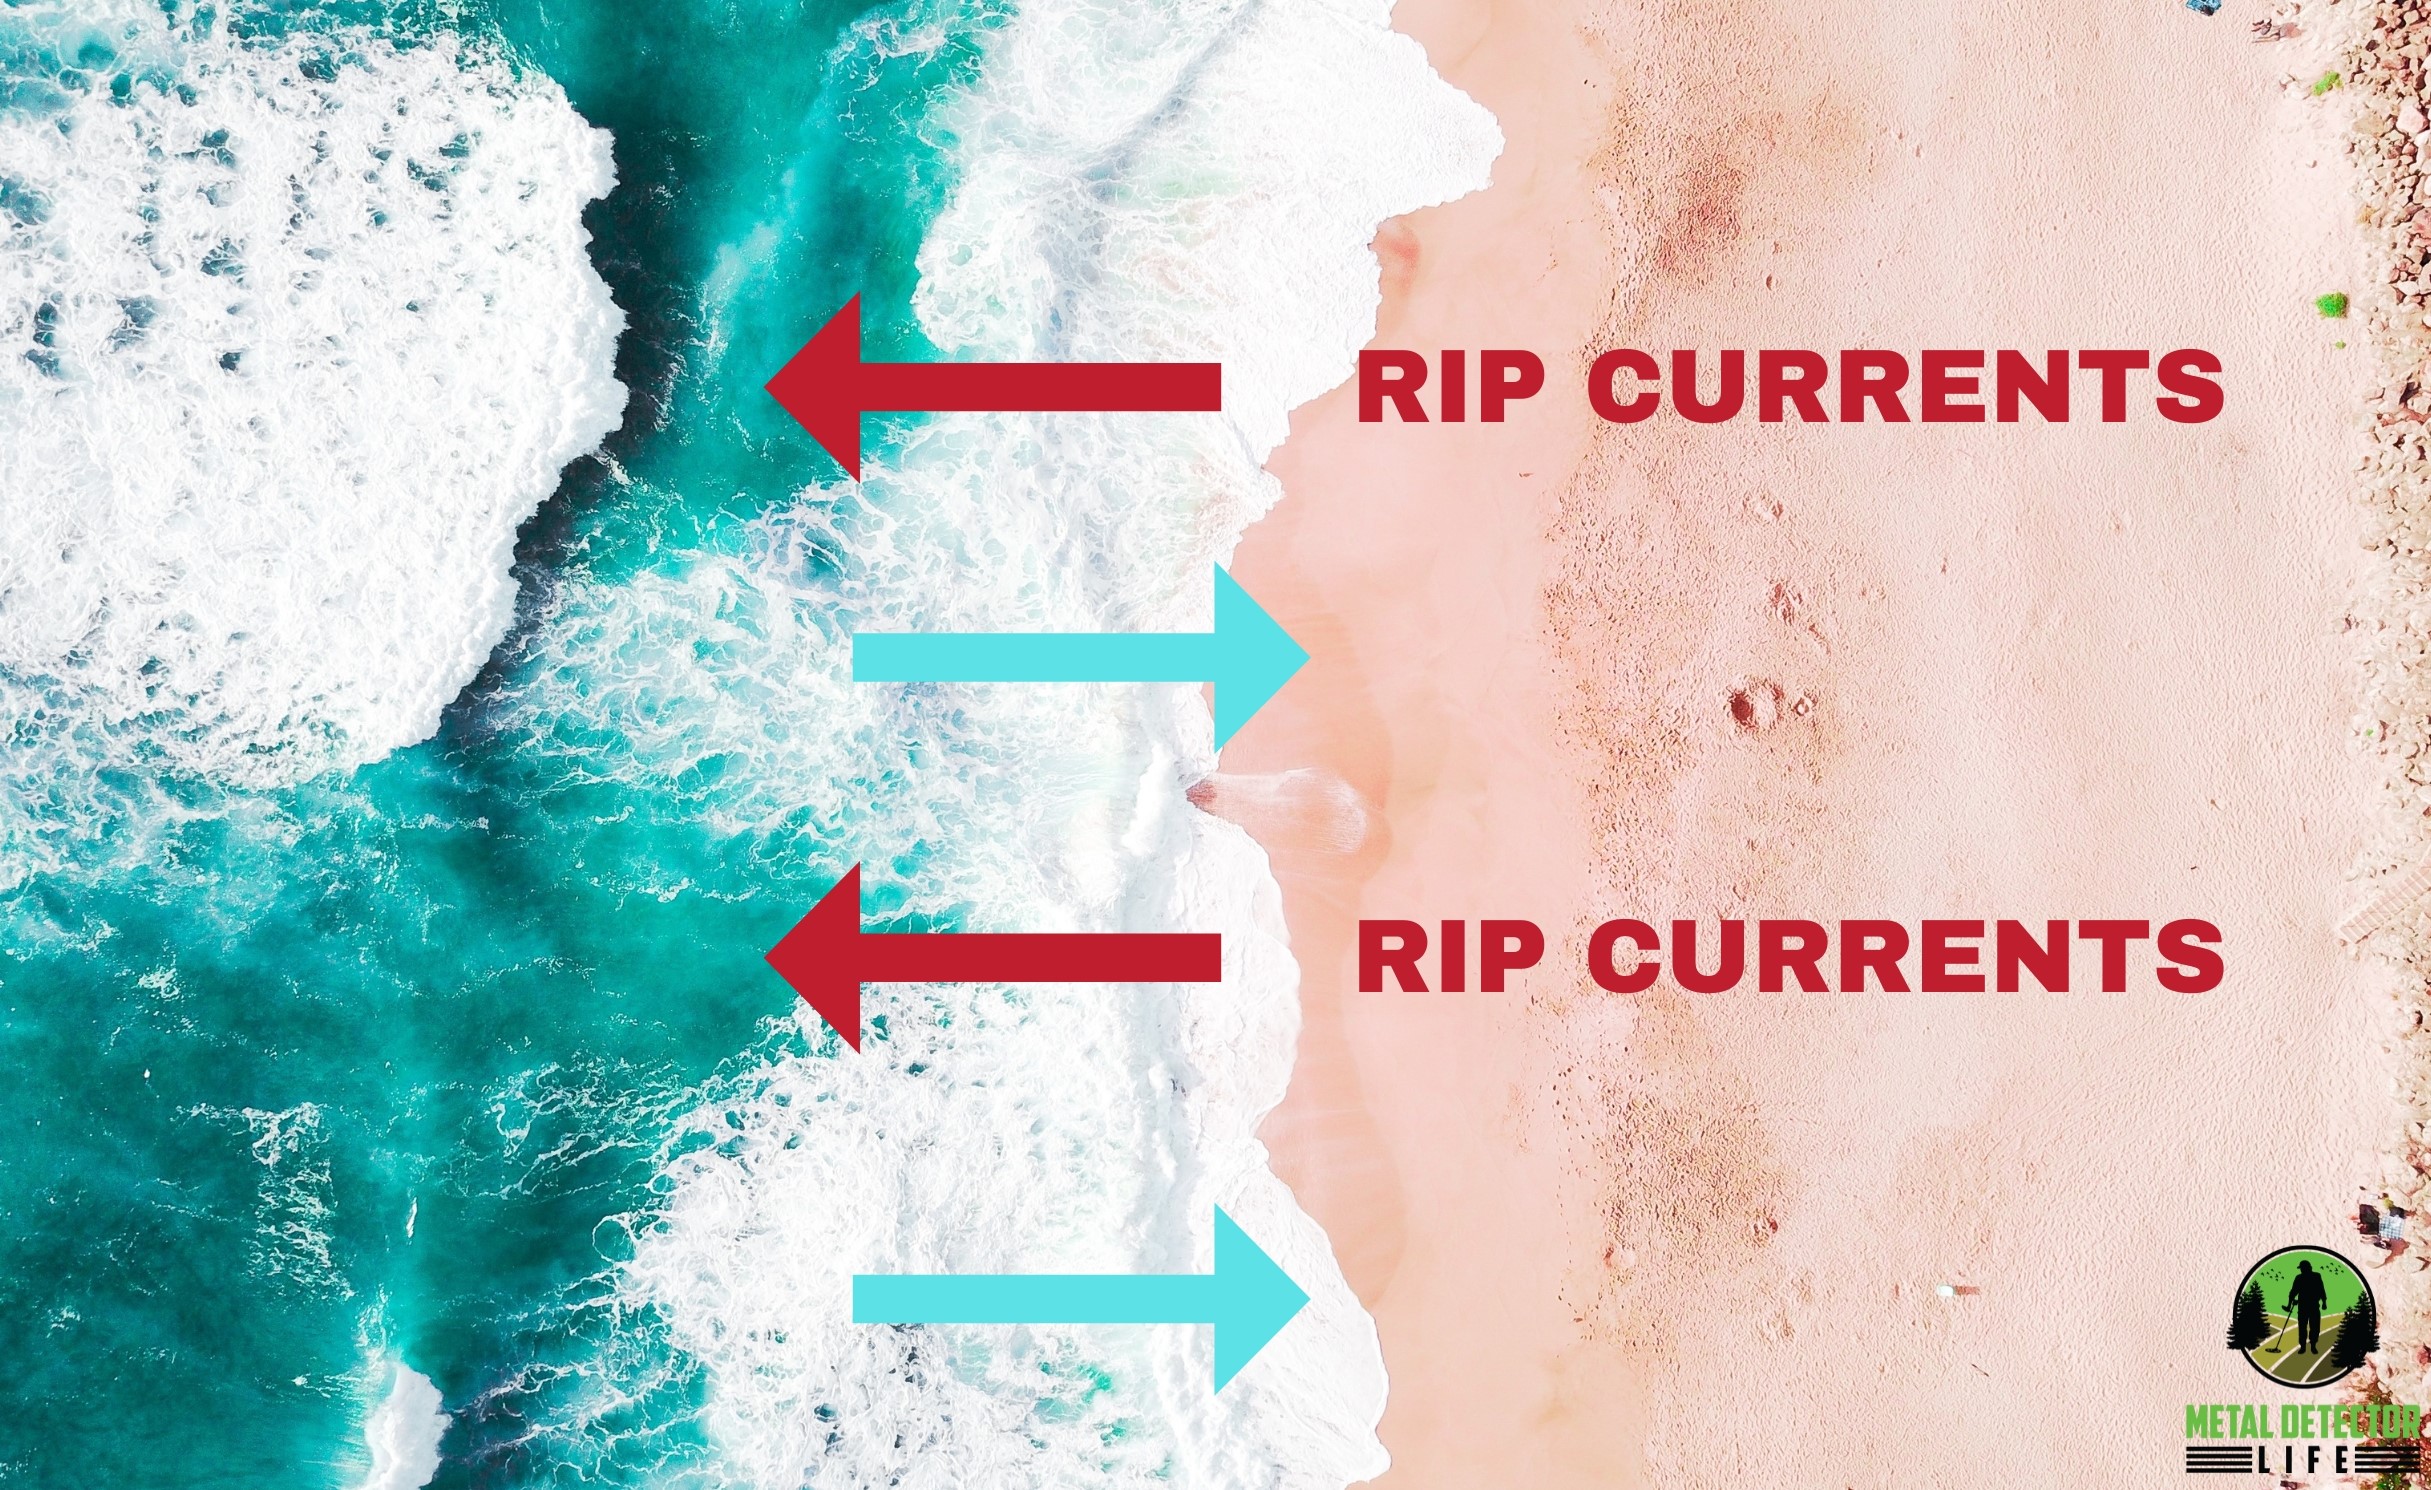 Rip currents at the coastline of the sea. 